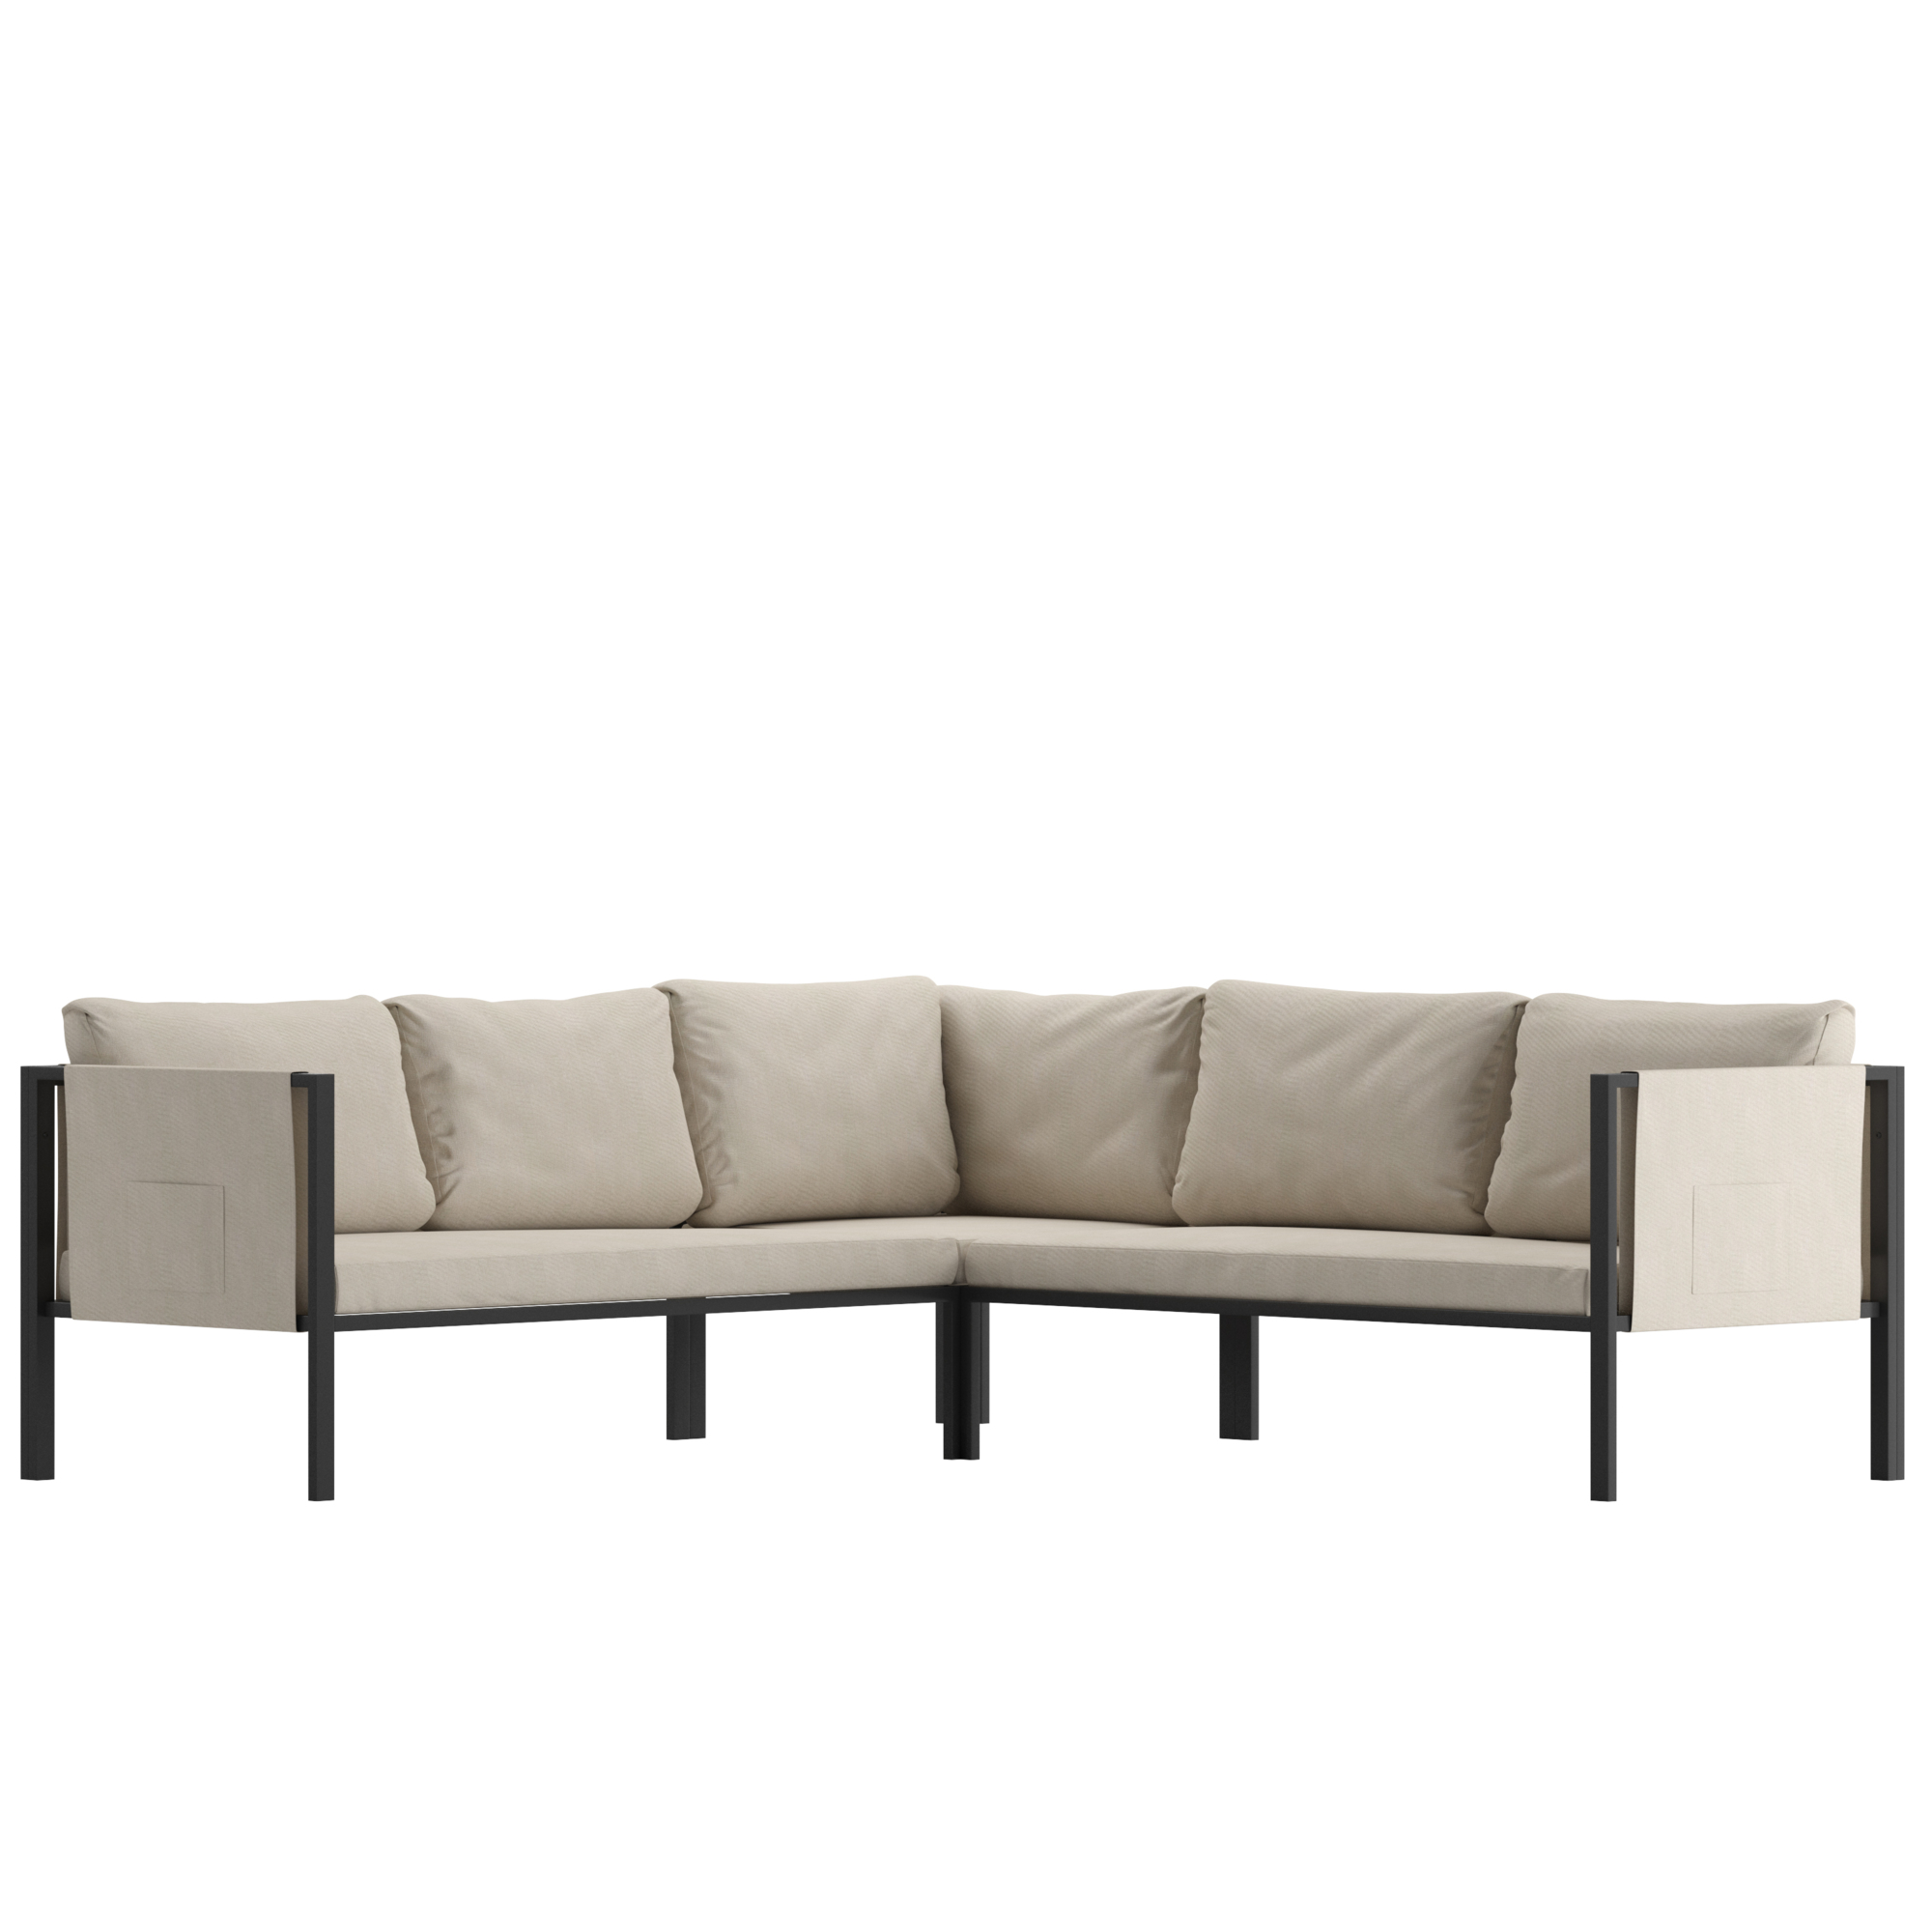 Flash Furniture, Black Sectional with Storage Beige Cushions, Primary Color Beige, Material Steel, Width 85.25 in, Model GM201108SECGY